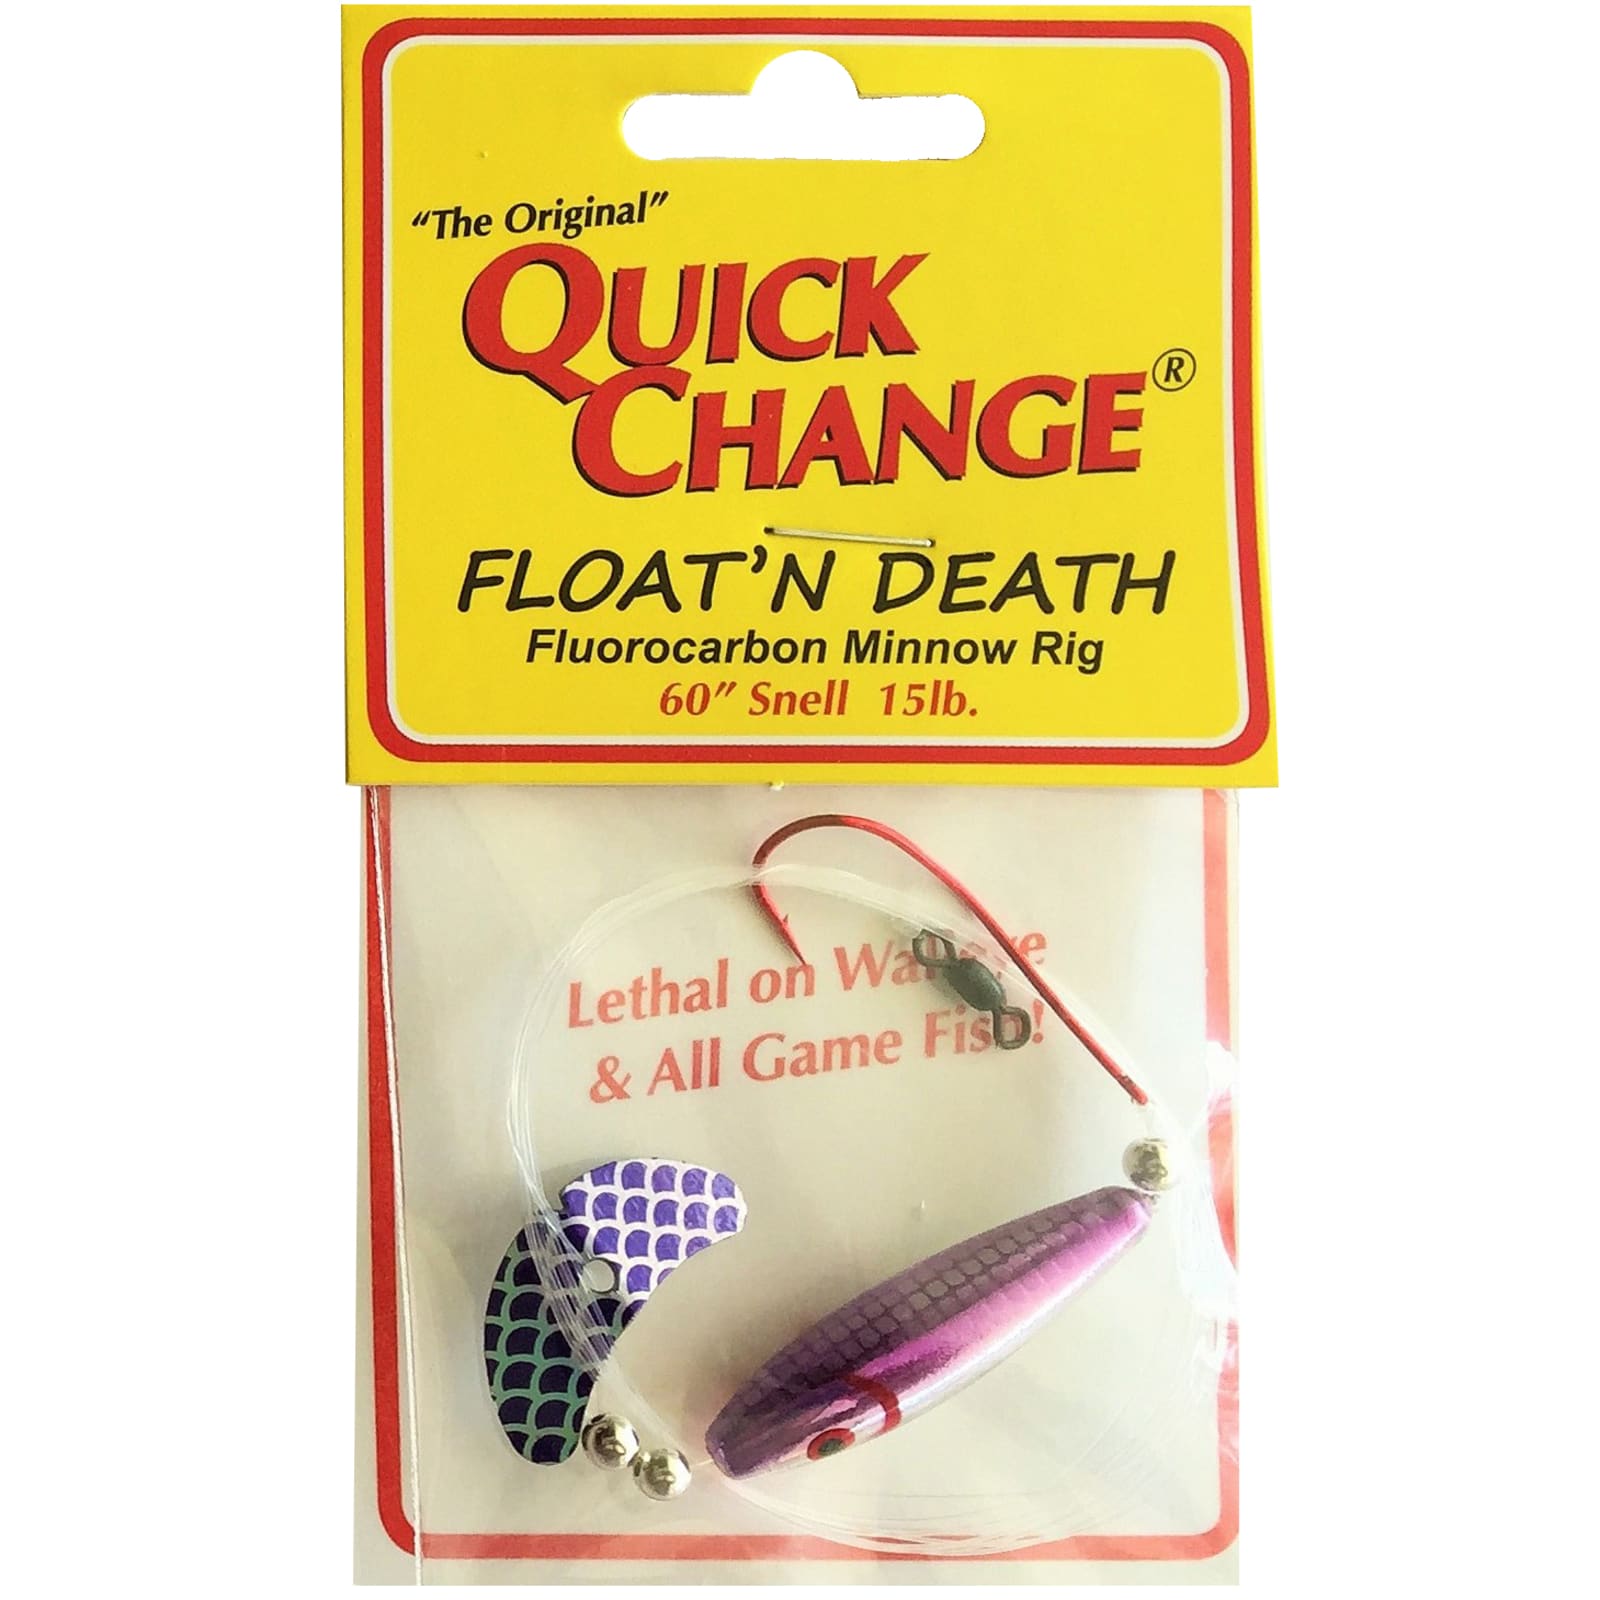 Fish Candy 2 Hook Spinner - Cisco Purple by Quick Change at Fleet Farm